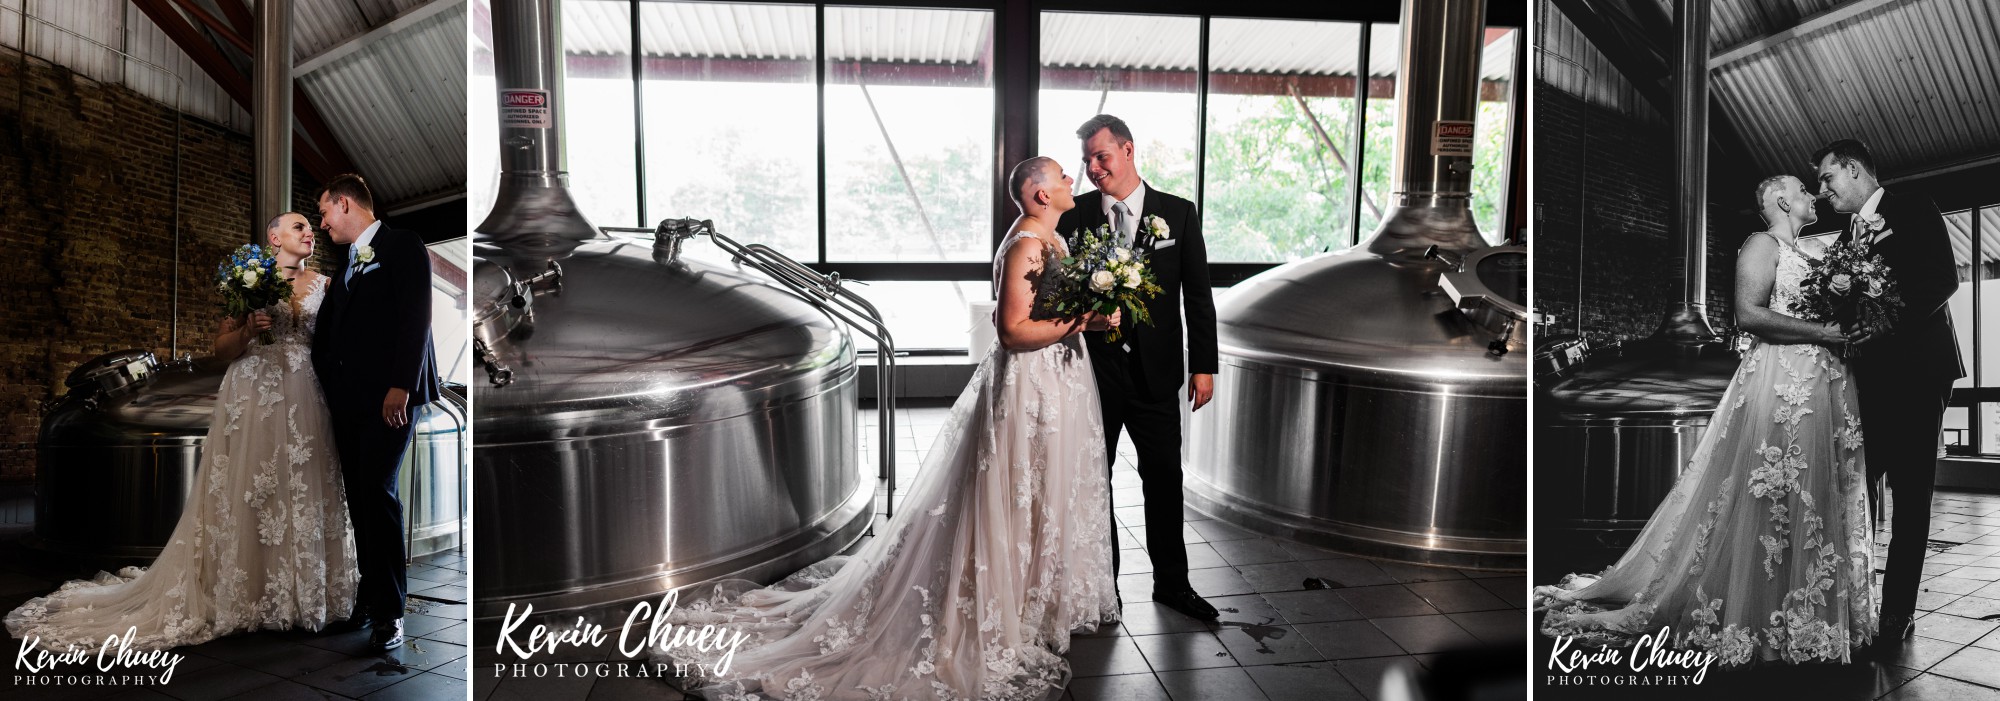 Great Lakes Brewing Company Tasting Room Wedding - Brewery Portraits